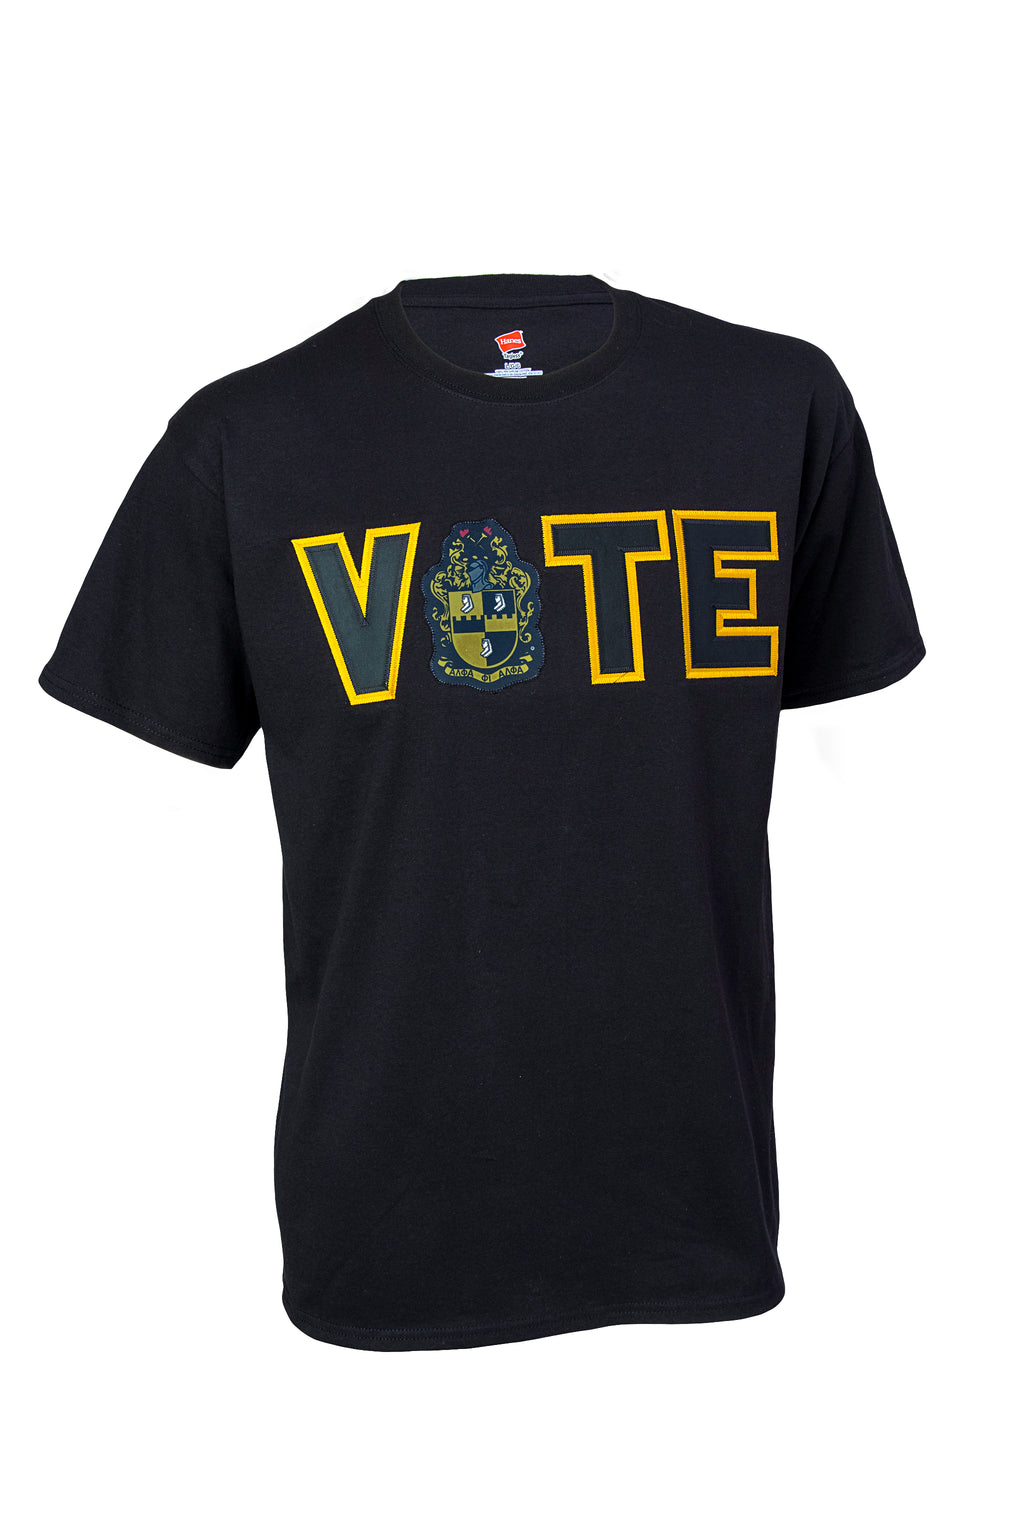 Embroidered Alpha Vote Tee